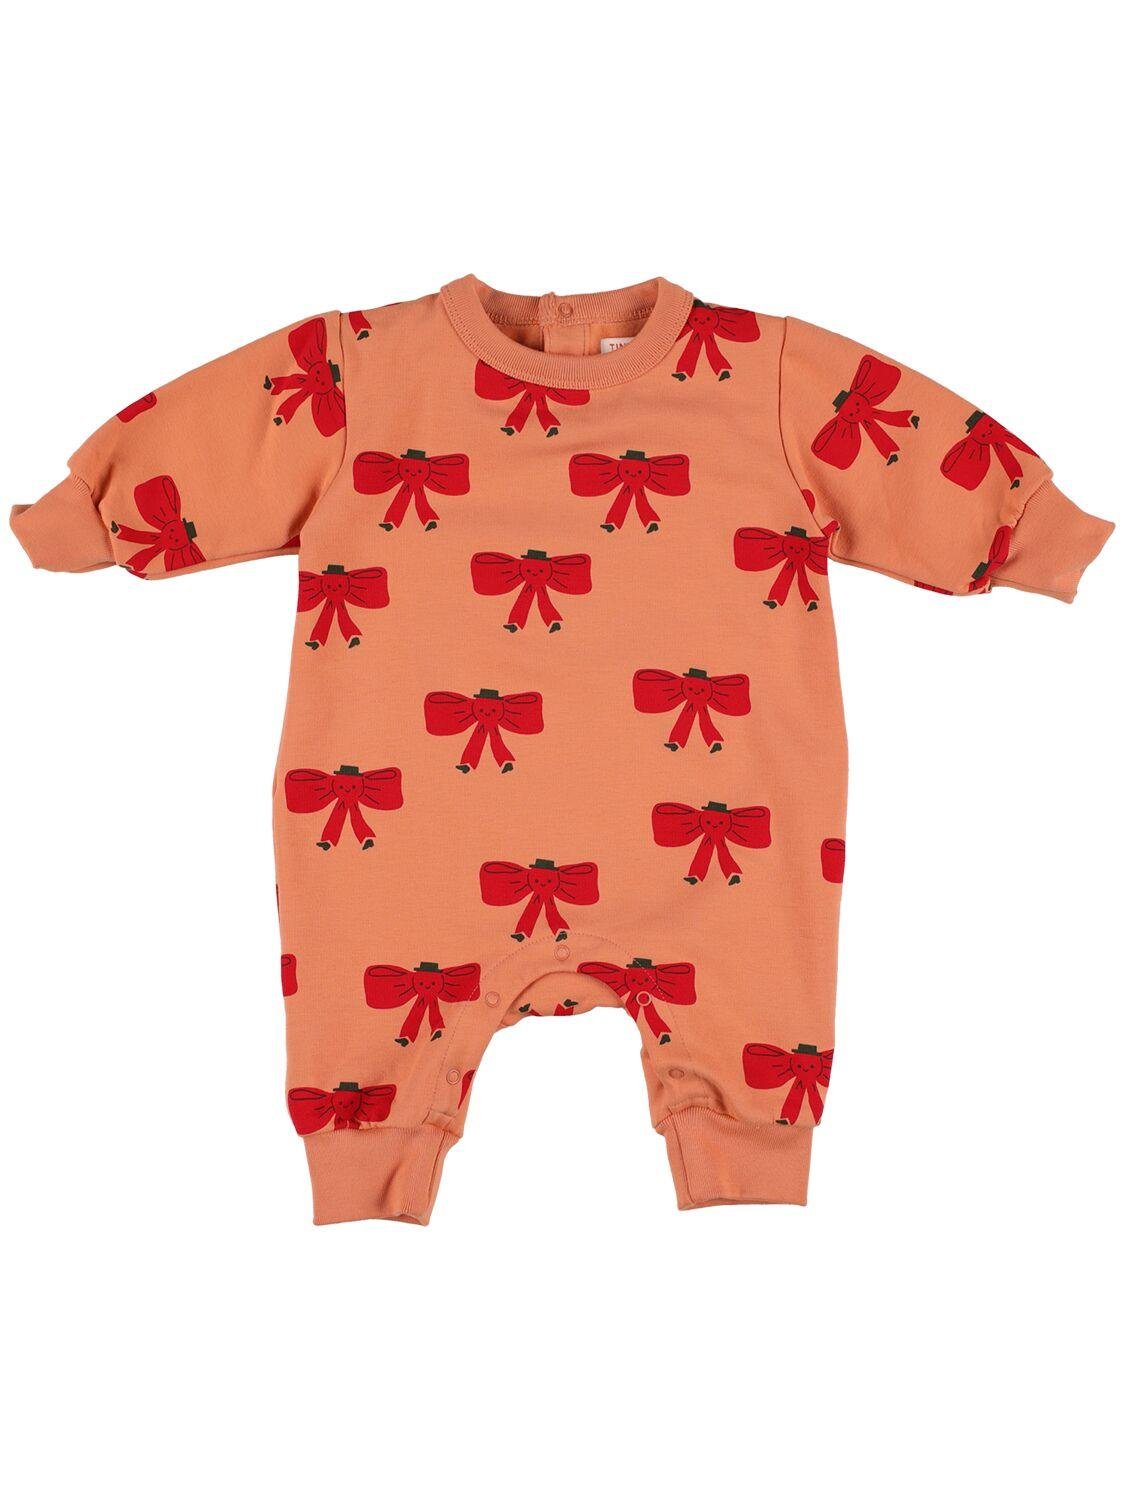 Bow Print Cotton Romper by TINY COTTONS